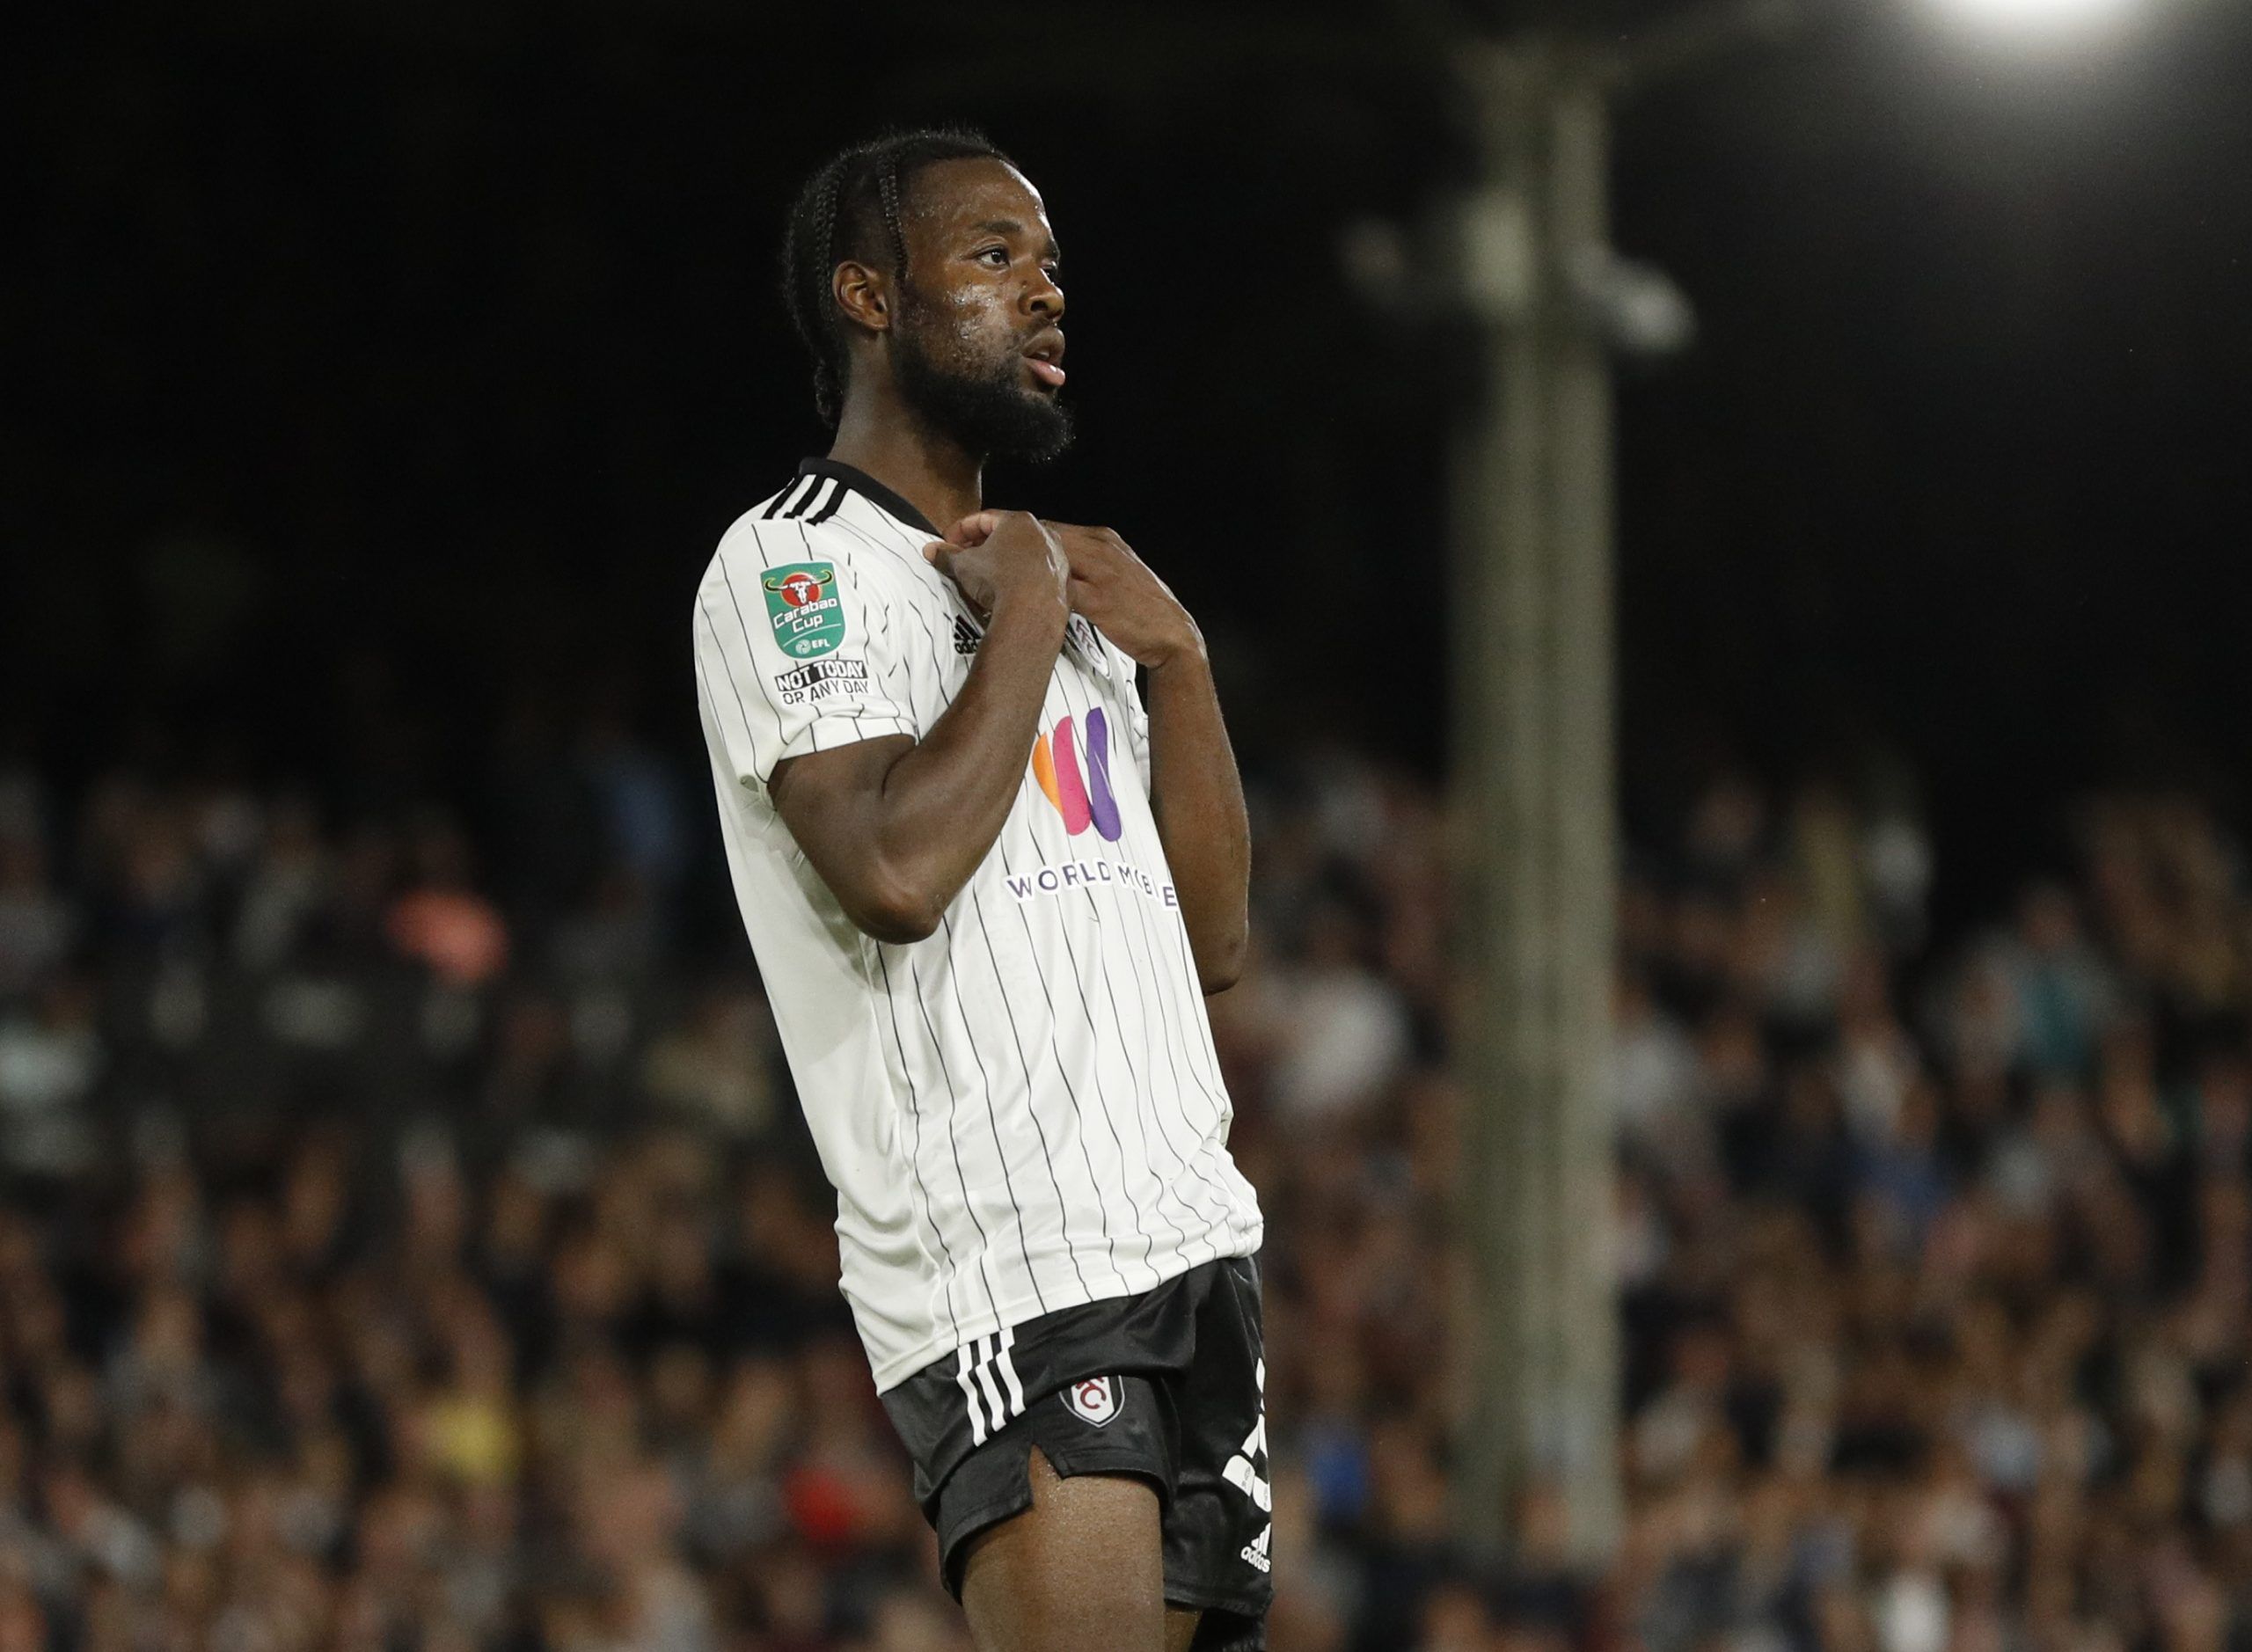 Soccer Football - Carabao Cup - Third Round - Fulham v Leeds United - Craven Cottage, London, Britain - September 21, 2021 Fulham's Josh Onomah reacts after missing a penalty during the shootout Action Images via Reuters/John Sibley EDITORIAL USE ONLY. No use with unauthorized audio, video, data, fixture lists, club/league logos or 'live' services. Online in-match use limited to 75 images, no video emulation. No use in betting, games or single club /league/player publications.  Please contact yo